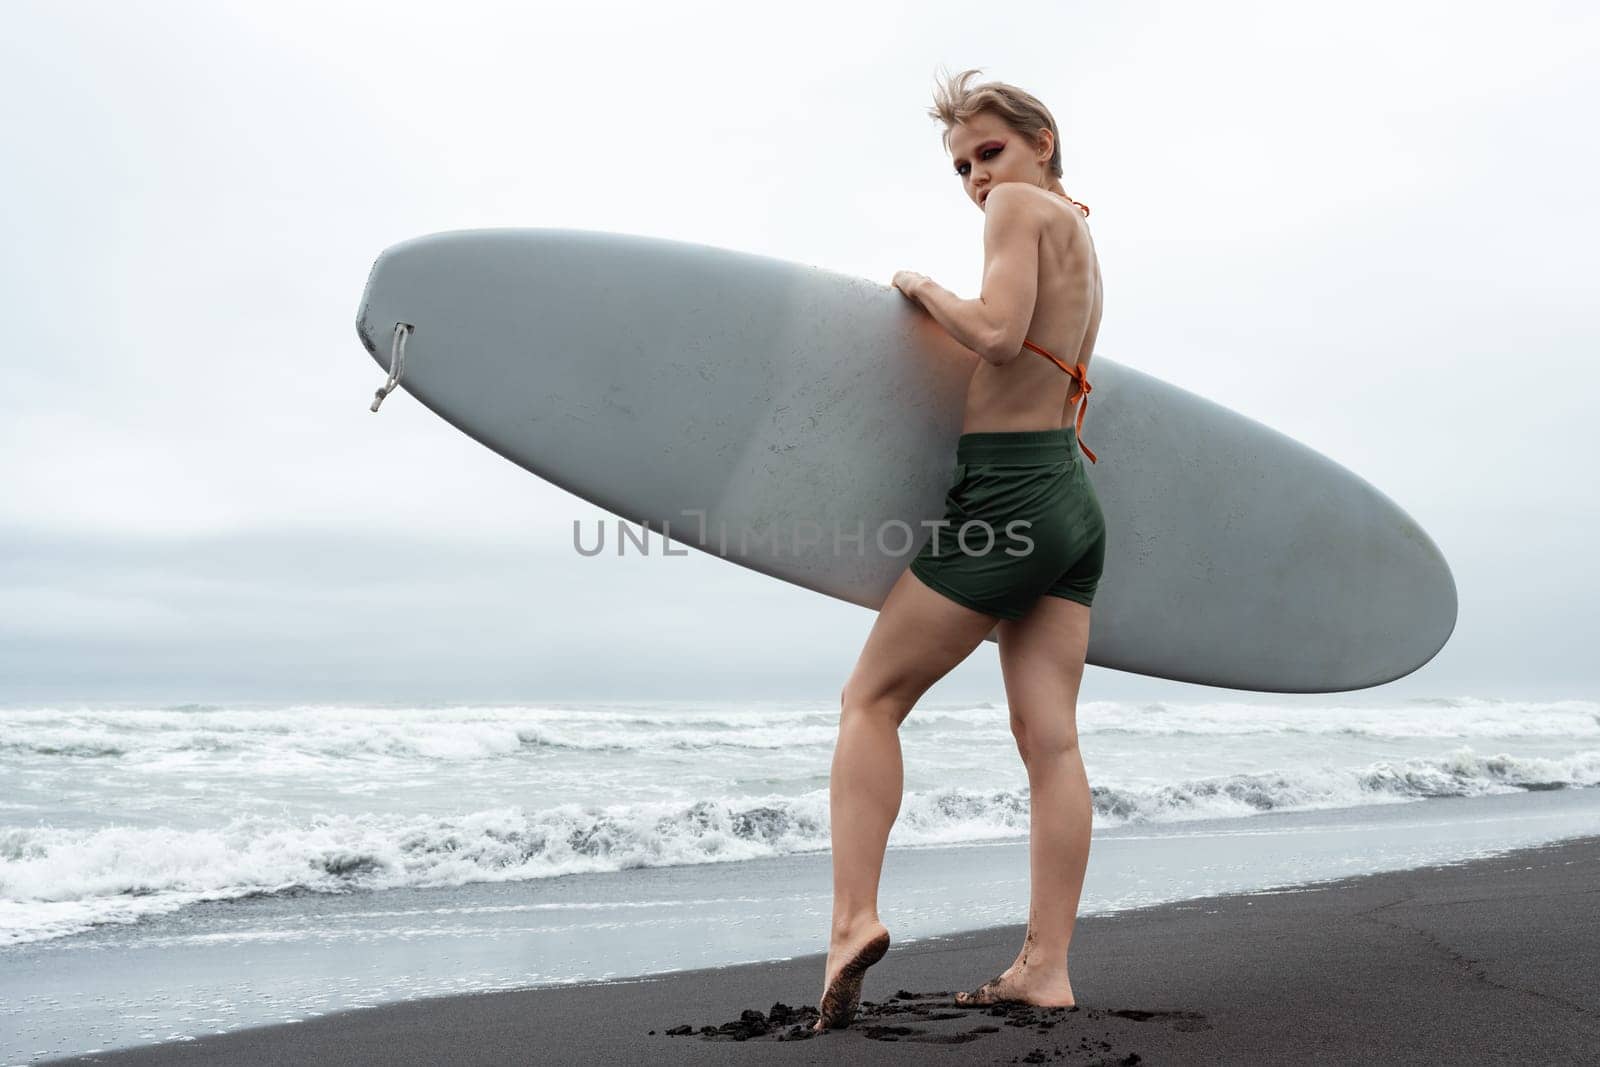 Female surfer standing on black sandy beach holding white surfboard against background of sea waves during summer beach vacation. Sporty woman looking over her shoulder. Active lifestyle concept